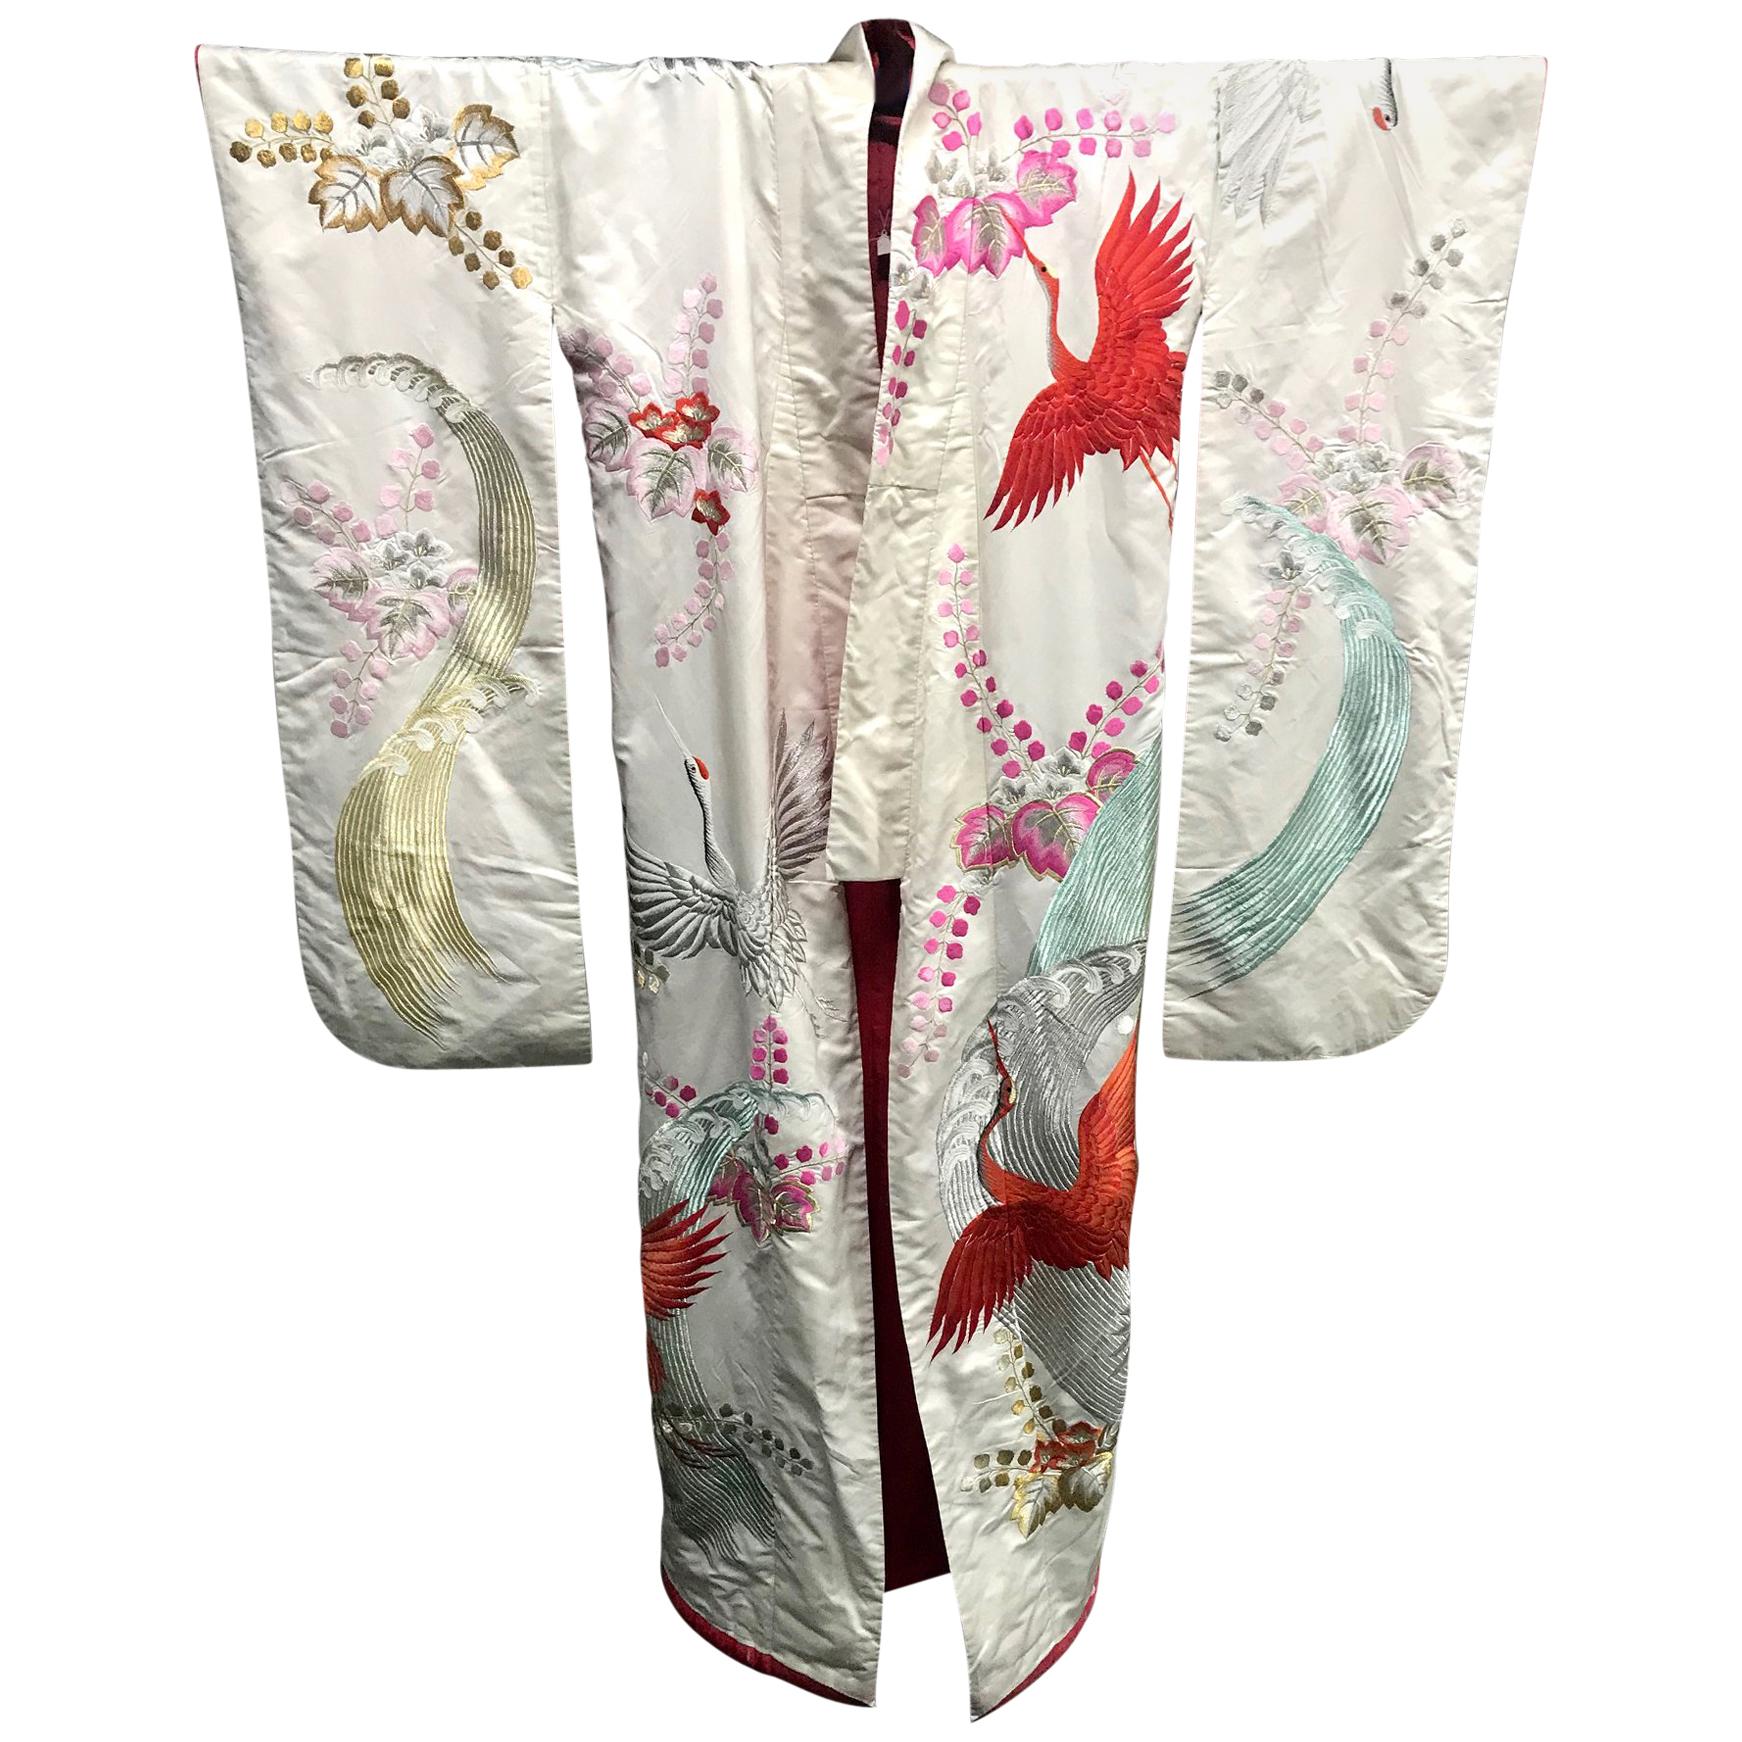 An exceptional Japanese wedding ceremonial kimono Uchitake, circa 1930s in oriental Art Deco fashion. Cream white silk background with elaborate and intricate embroidery in color and gold threads that depict auspicious symbols such as the flying